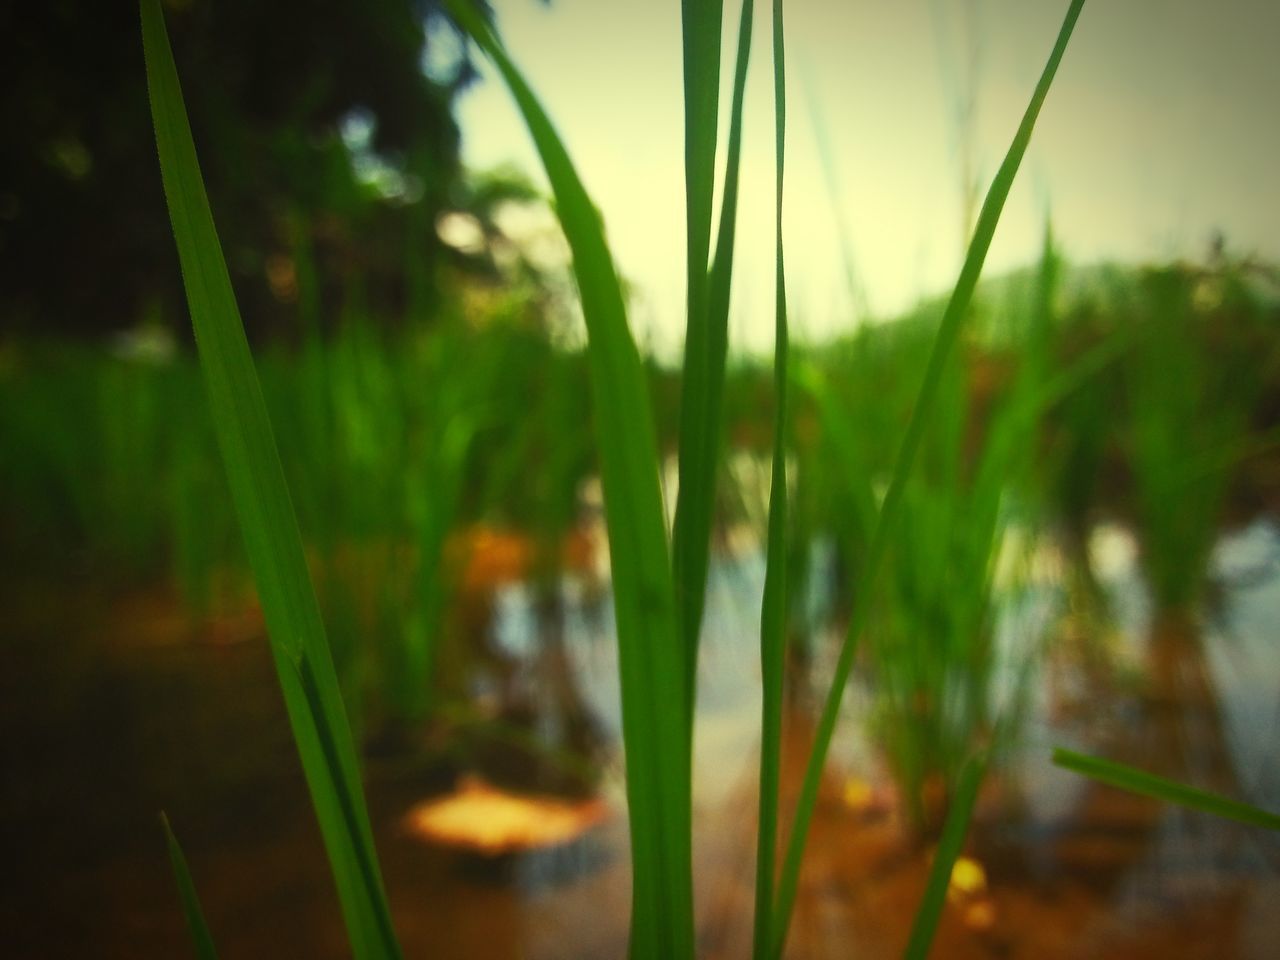 green, plant, nature, grass, sunlight, water, no people, growth, beauty in nature, leaf, land, close-up, tranquility, flower, outdoors, blade of grass, reflection, field, sky, environment, focus on foreground, landscape, day, macro photography, morning, selective focus, freshness, agriculture, plant stem